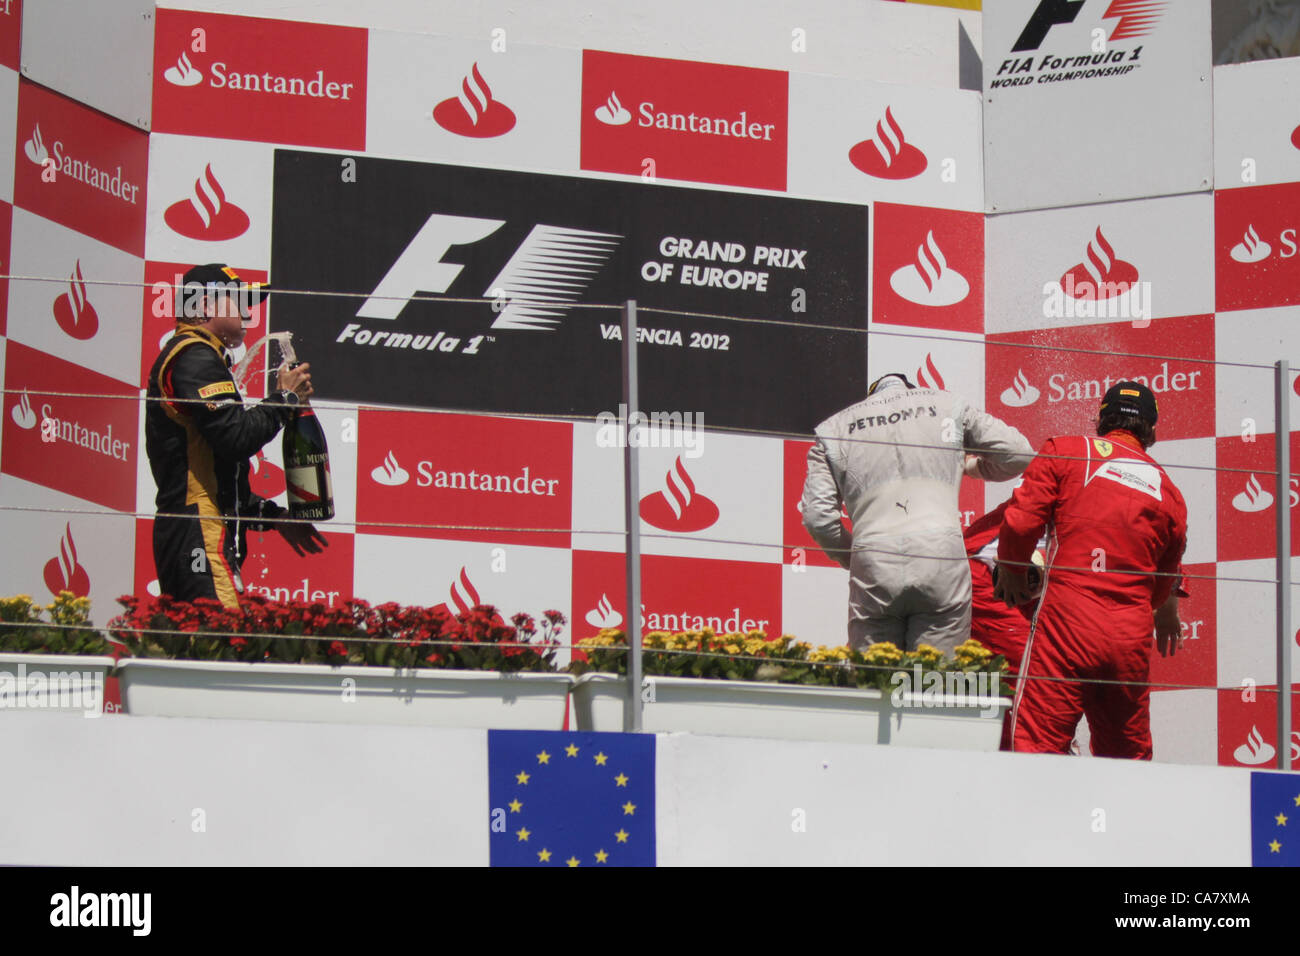 24.06.2012.  Valencia. Spain. 2012 Grand Prix Europe Valencia 2012 Formula 1 Grand Prix Europe Valencia 2012. Podium shows Alonson and other first 3 places Stock Photo